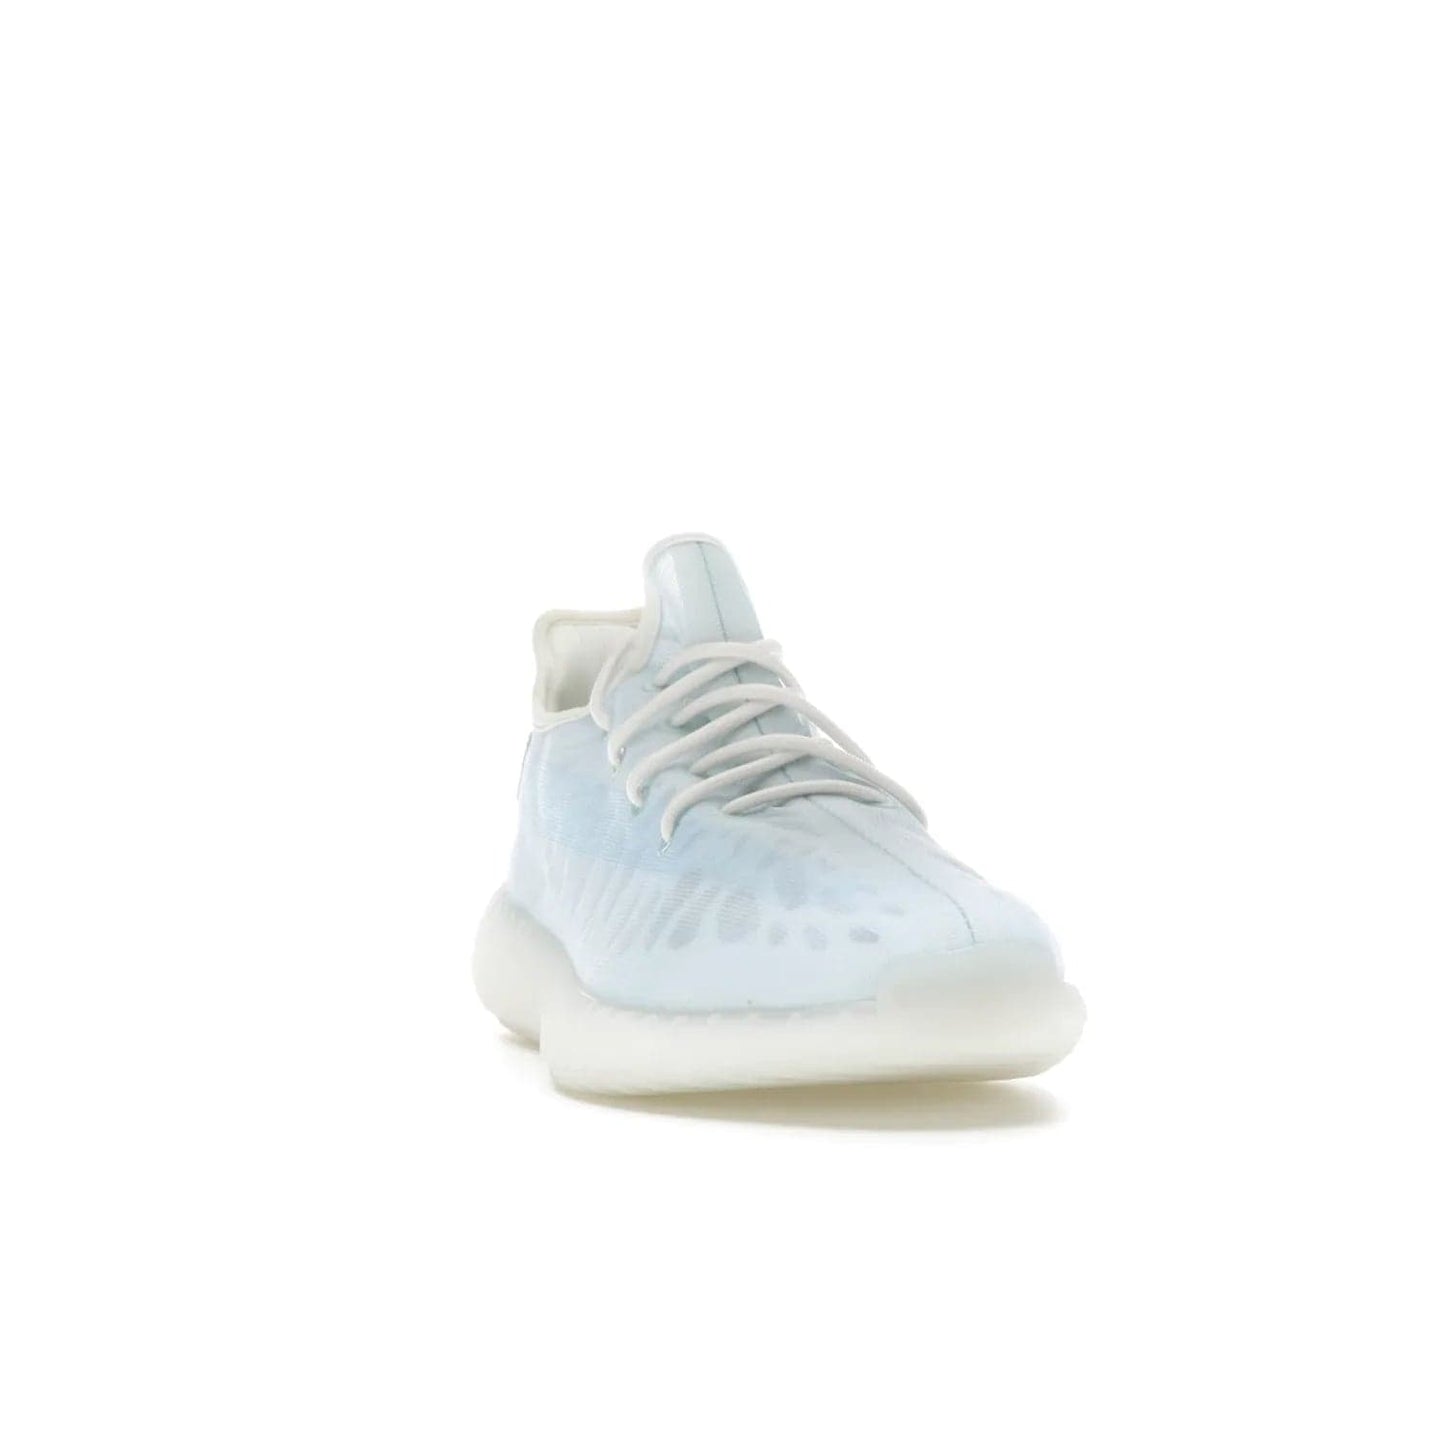 adidas Yeezy Boost 350 V2 Mono Ice - Image 8 - Only at www.BallersClubKickz.com - Introducing the adidas Yeezy 350 V2 Mono Ice - a sleek monofilament mesh design in Ice blue with Boost sole and heel pull tab. Released exclusively in the US for $220.